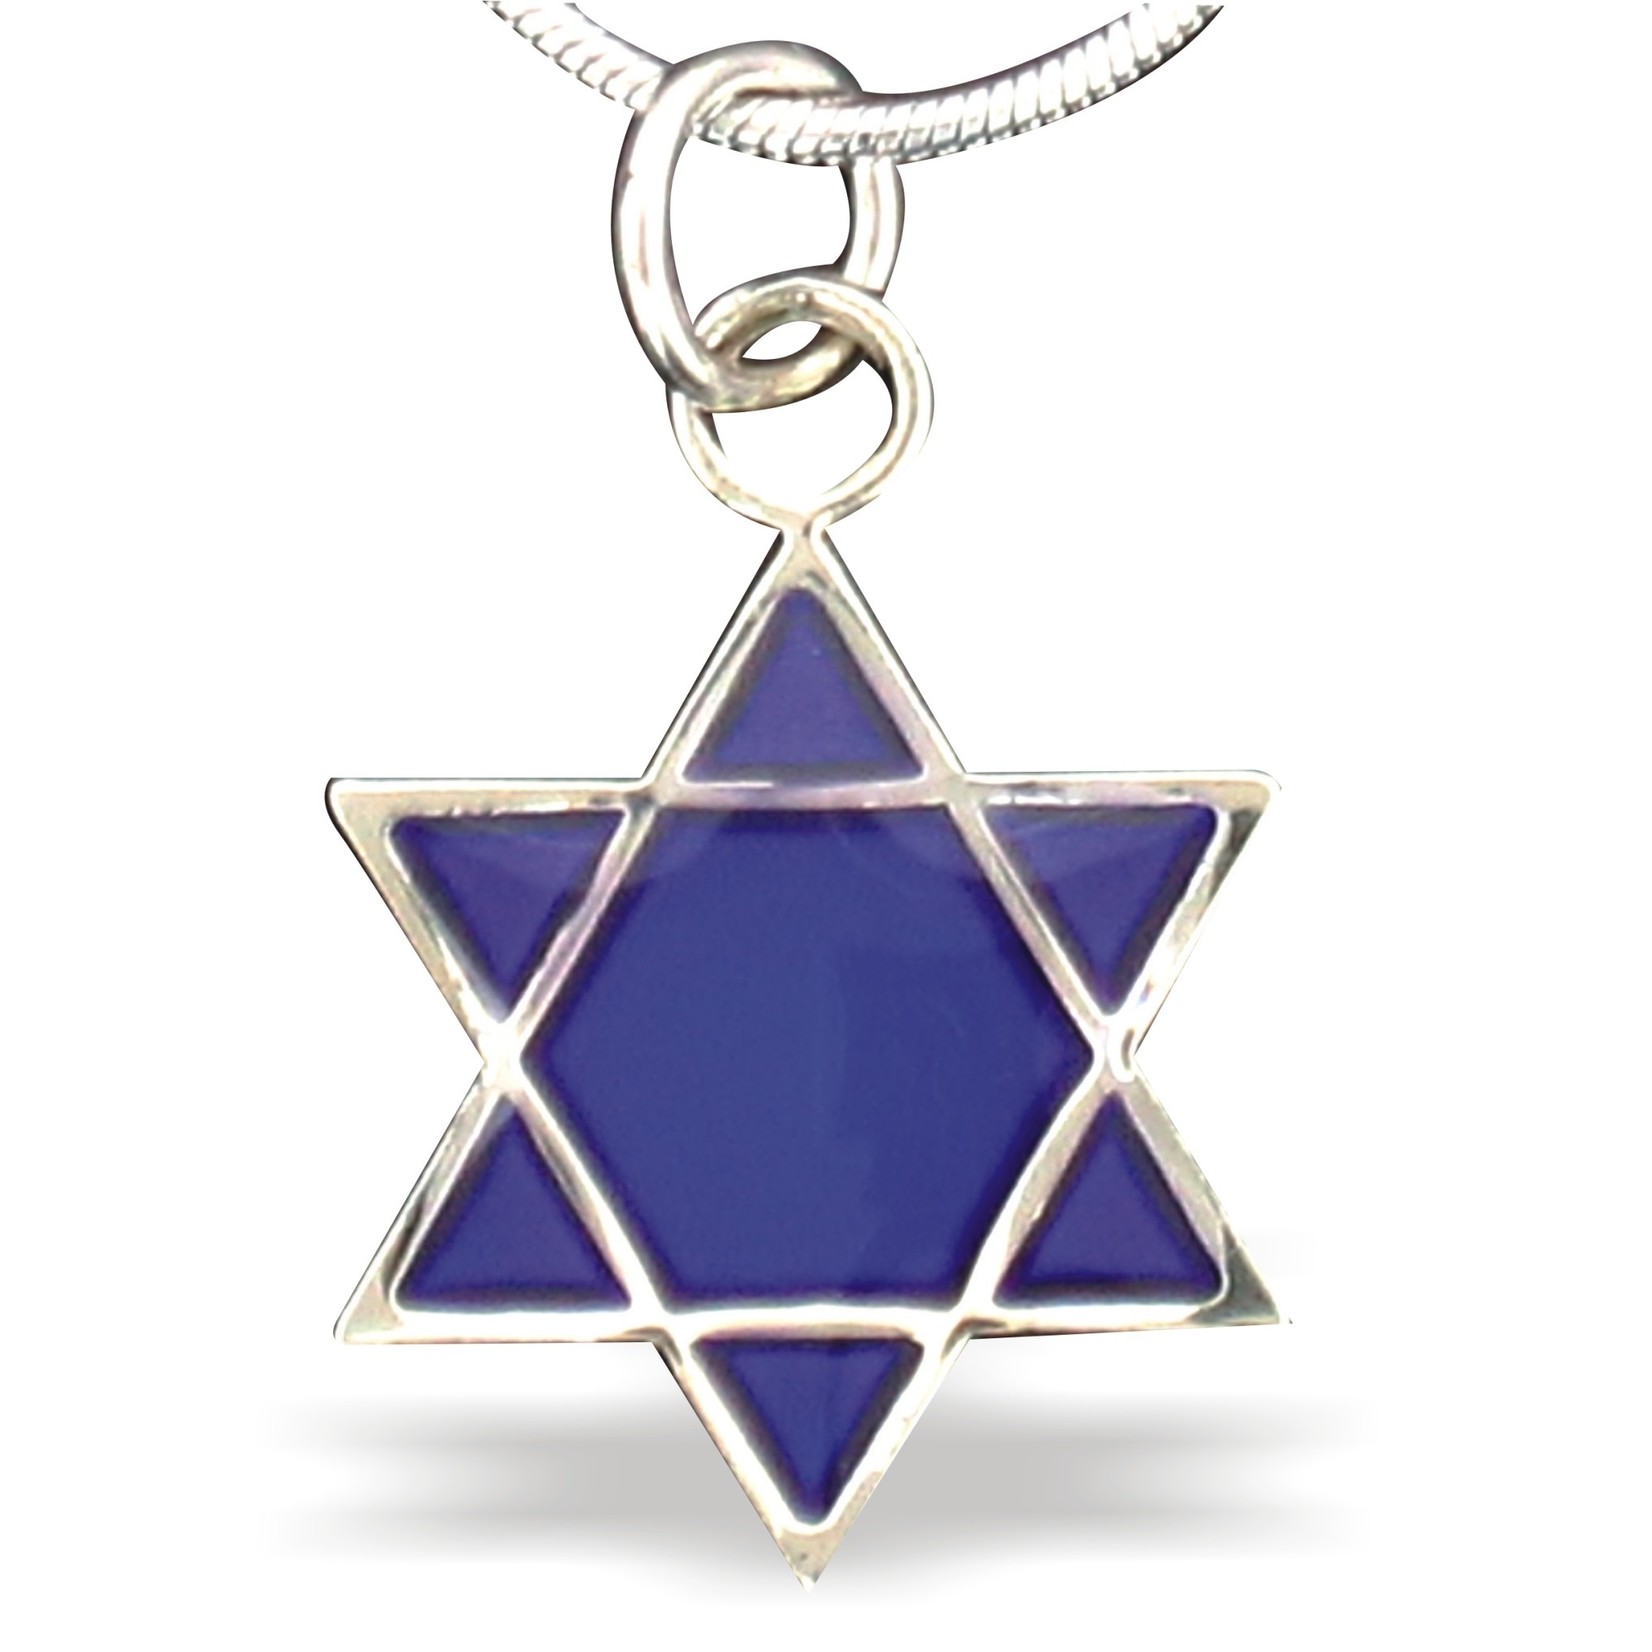 Magen David Necklace, Mood-Changing Colour